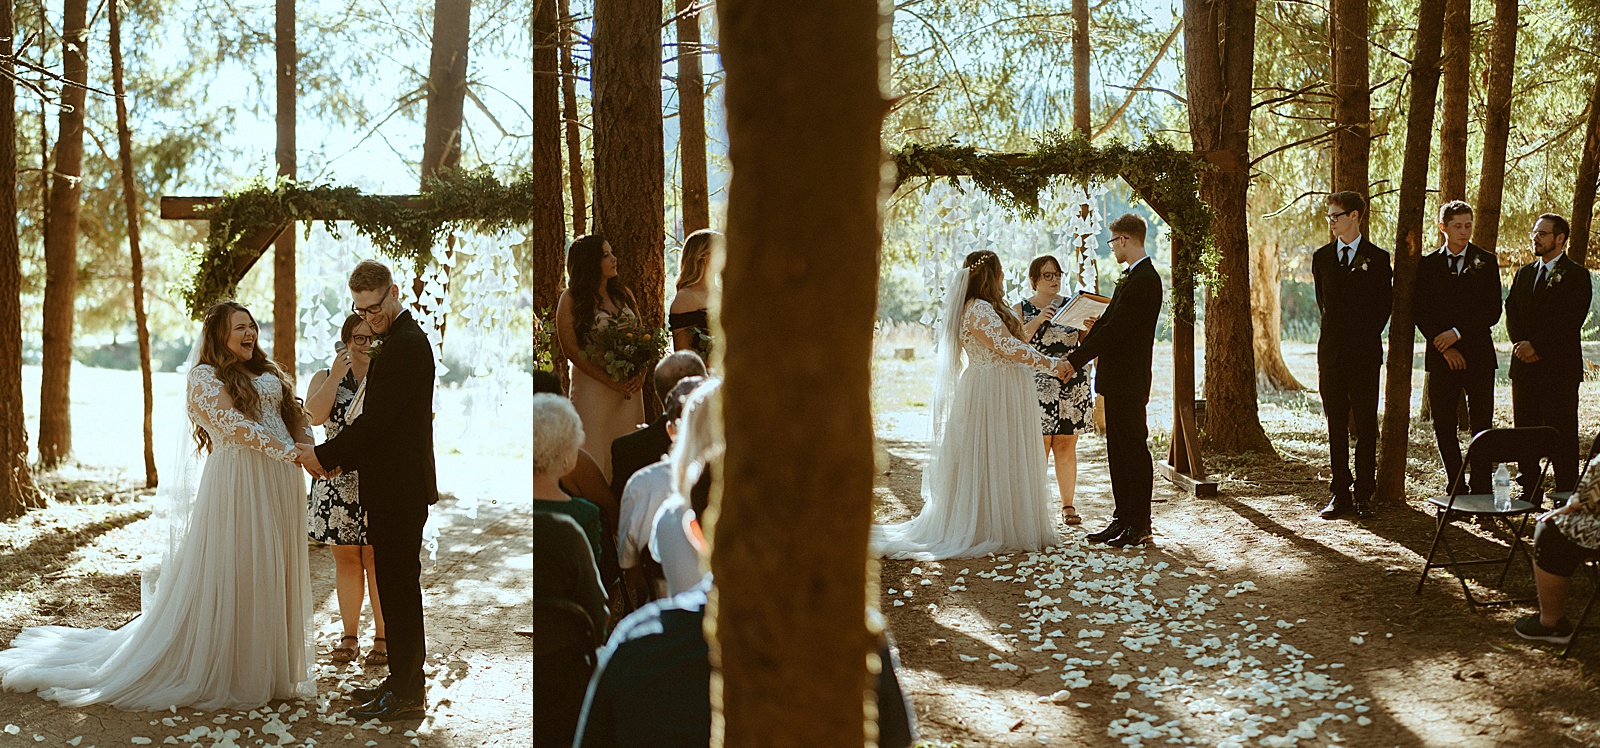 Bride and groom at alter in Oregon forest wedding by Danielle Johnson Photography